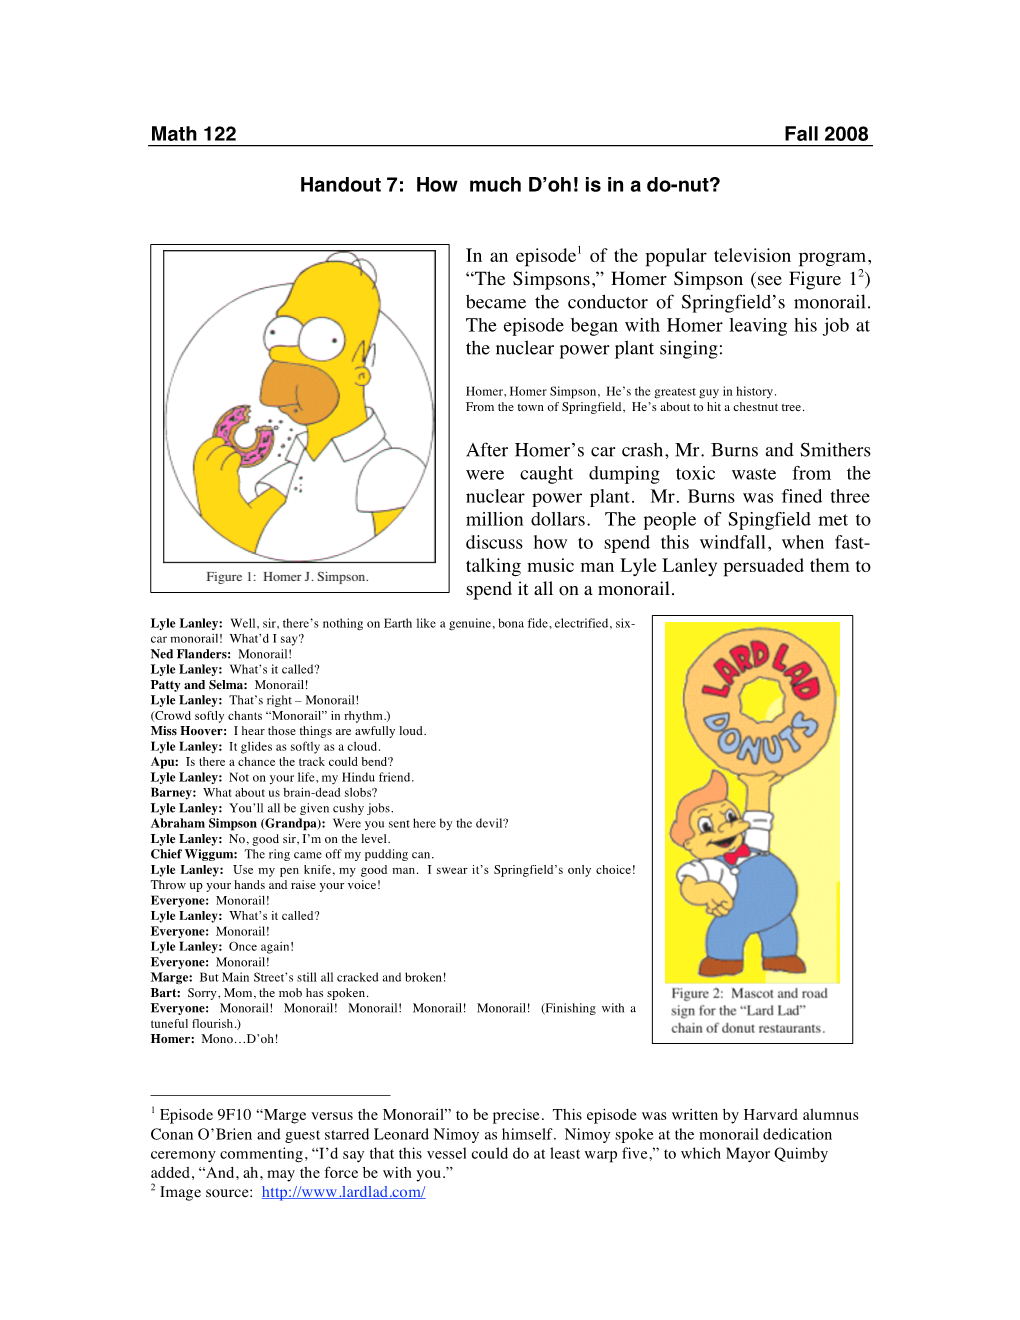 Math 122 Fall 2008 Handout 7: How Much D'oh! Is in a Do-Nut? in An